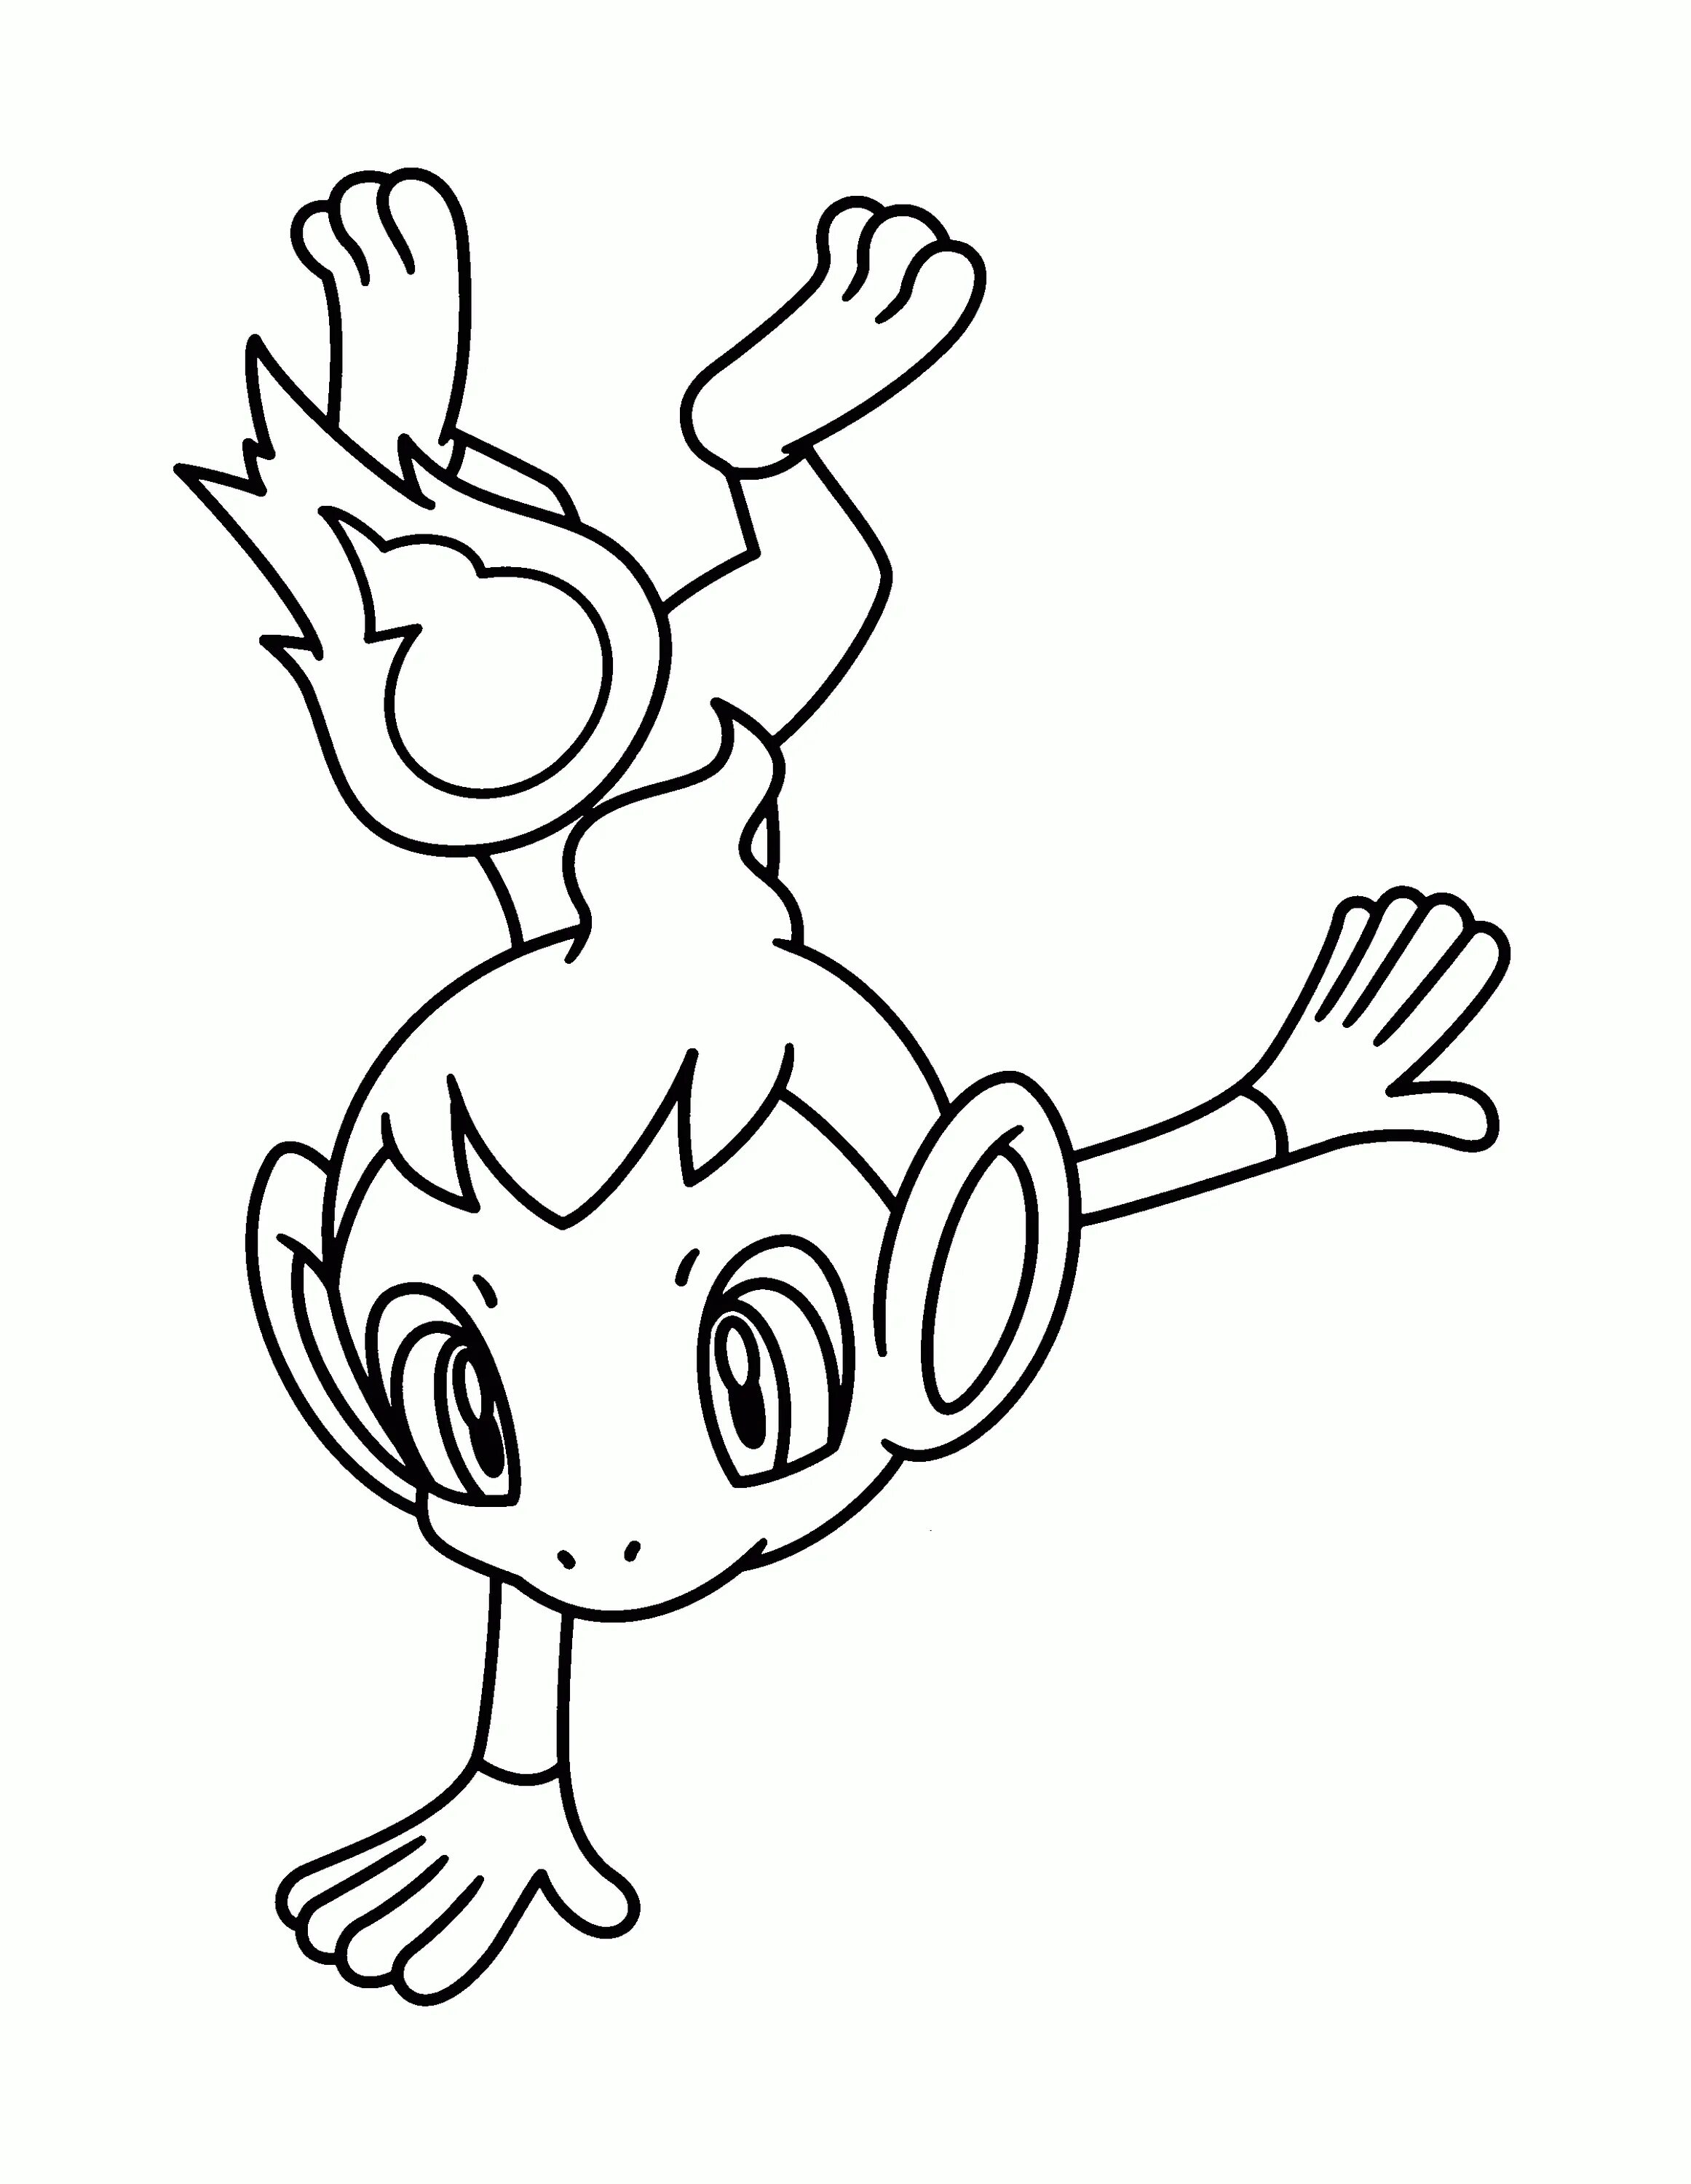 Shiny chimchar coloring book